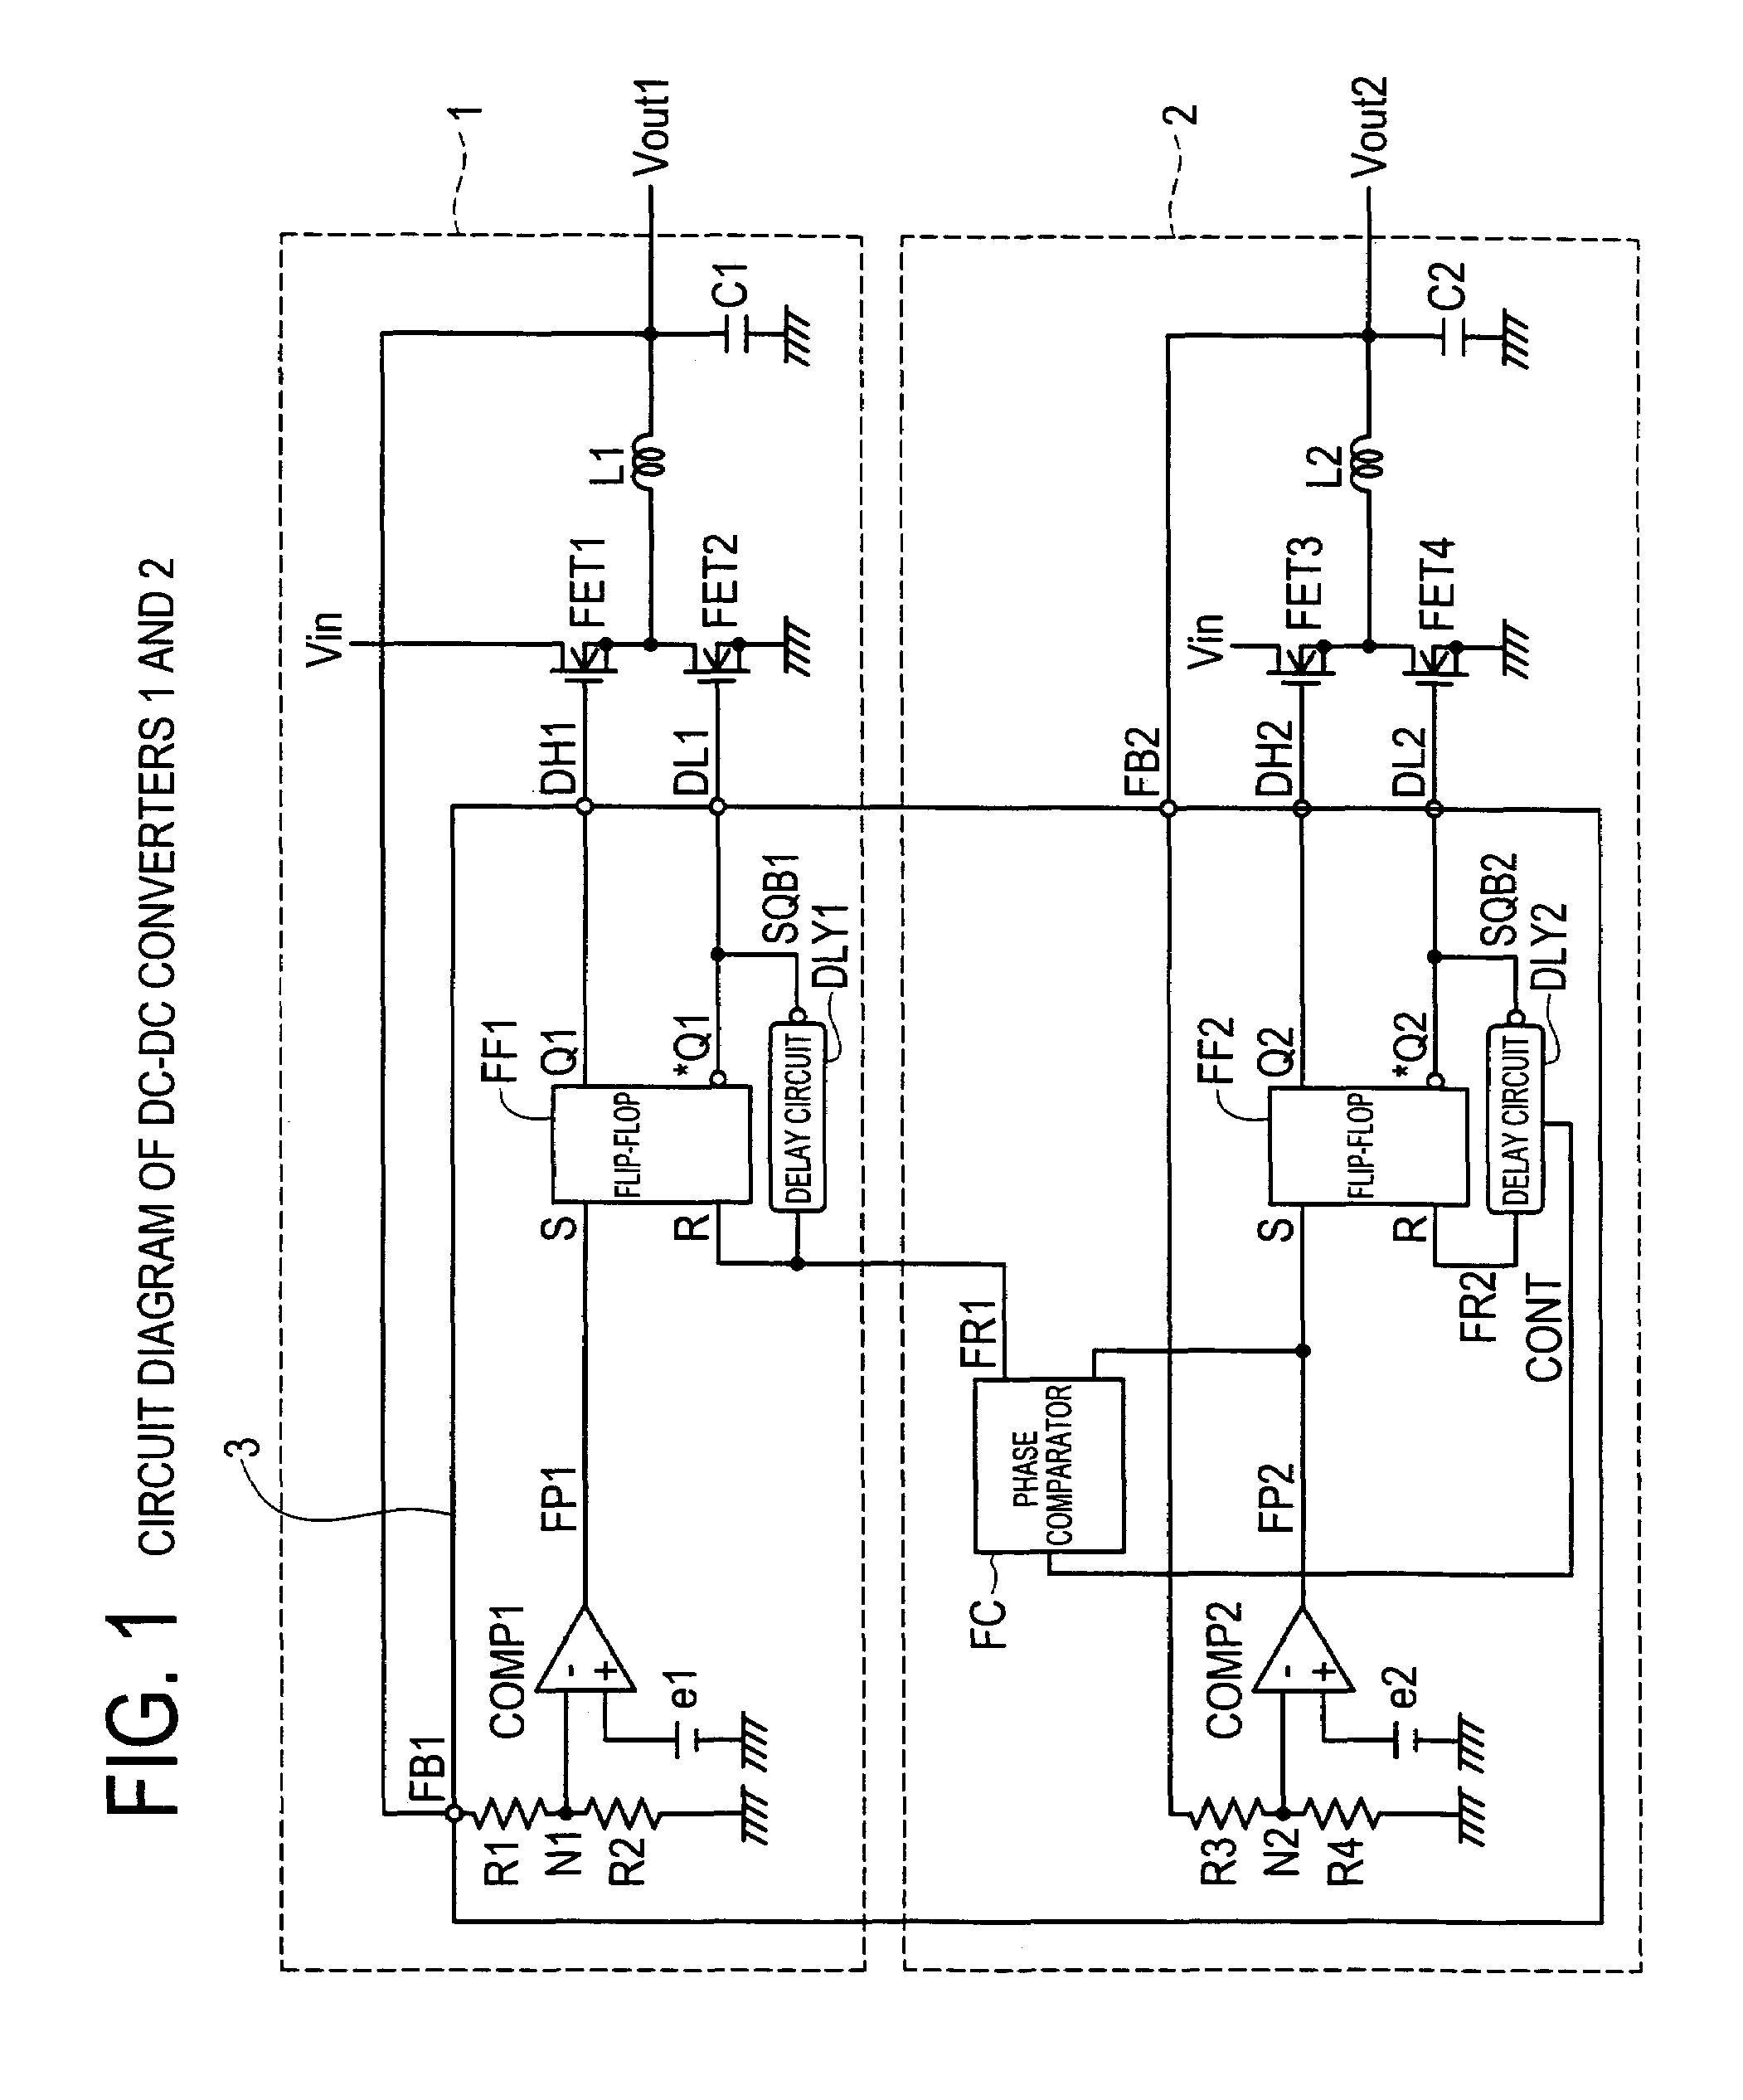 Plural output switching regulator with phase comparison and delay means